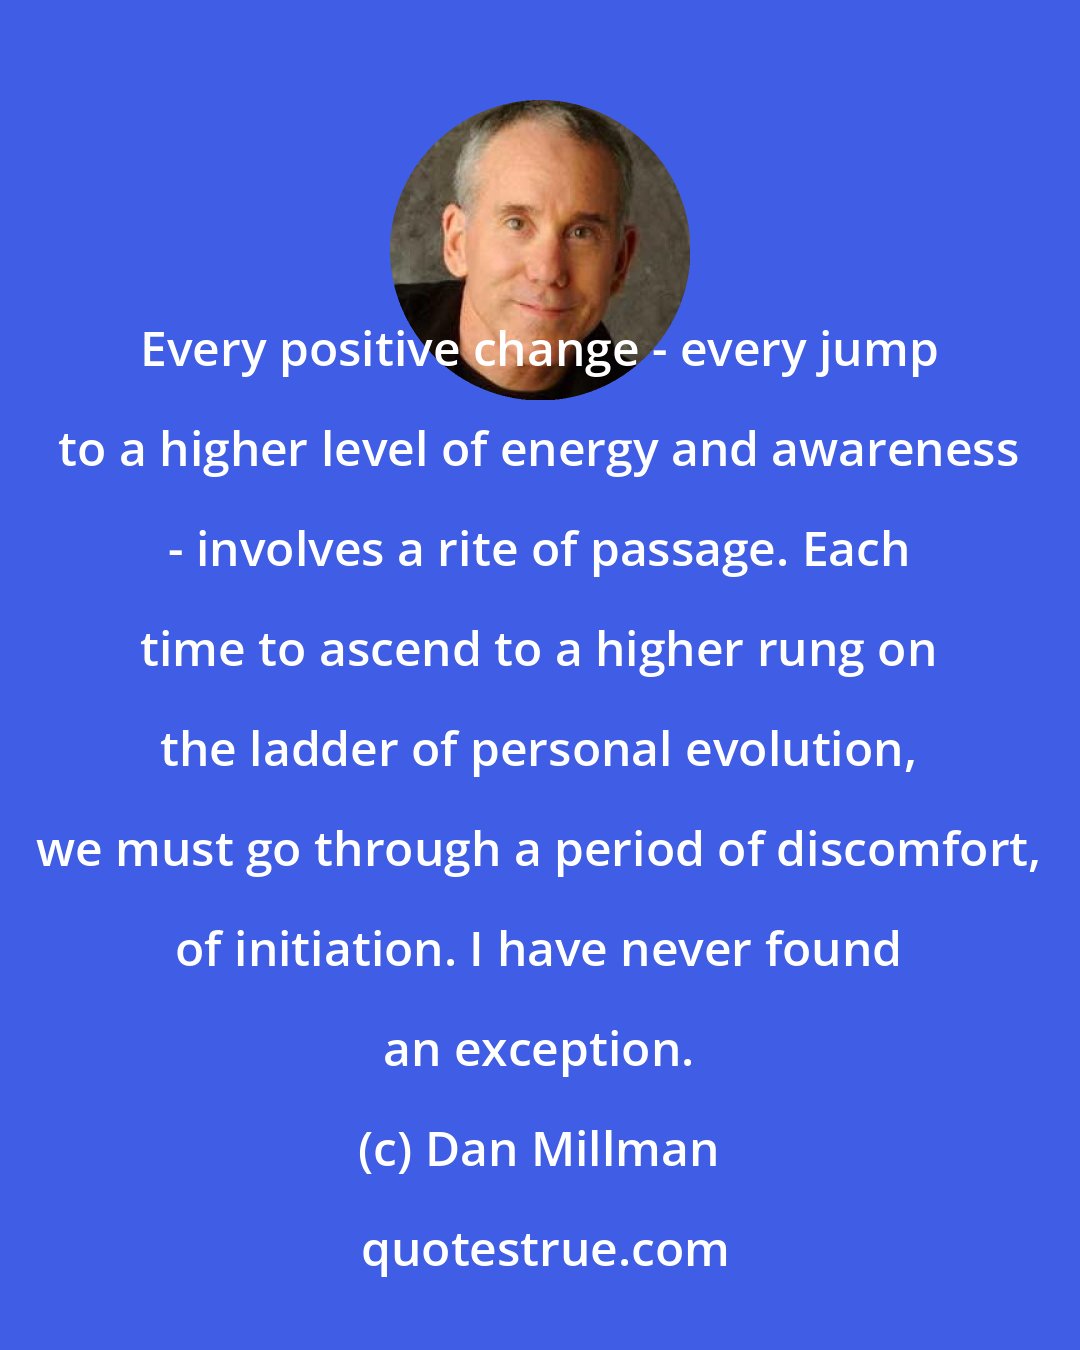 Dan Millman: Every positive change - every jump to a higher level of energy and awareness - involves a rite of passage. Each time to ascend to a higher rung on the ladder of personal evolution, we must go through a period of discomfort, of initiation. I have never found an exception.